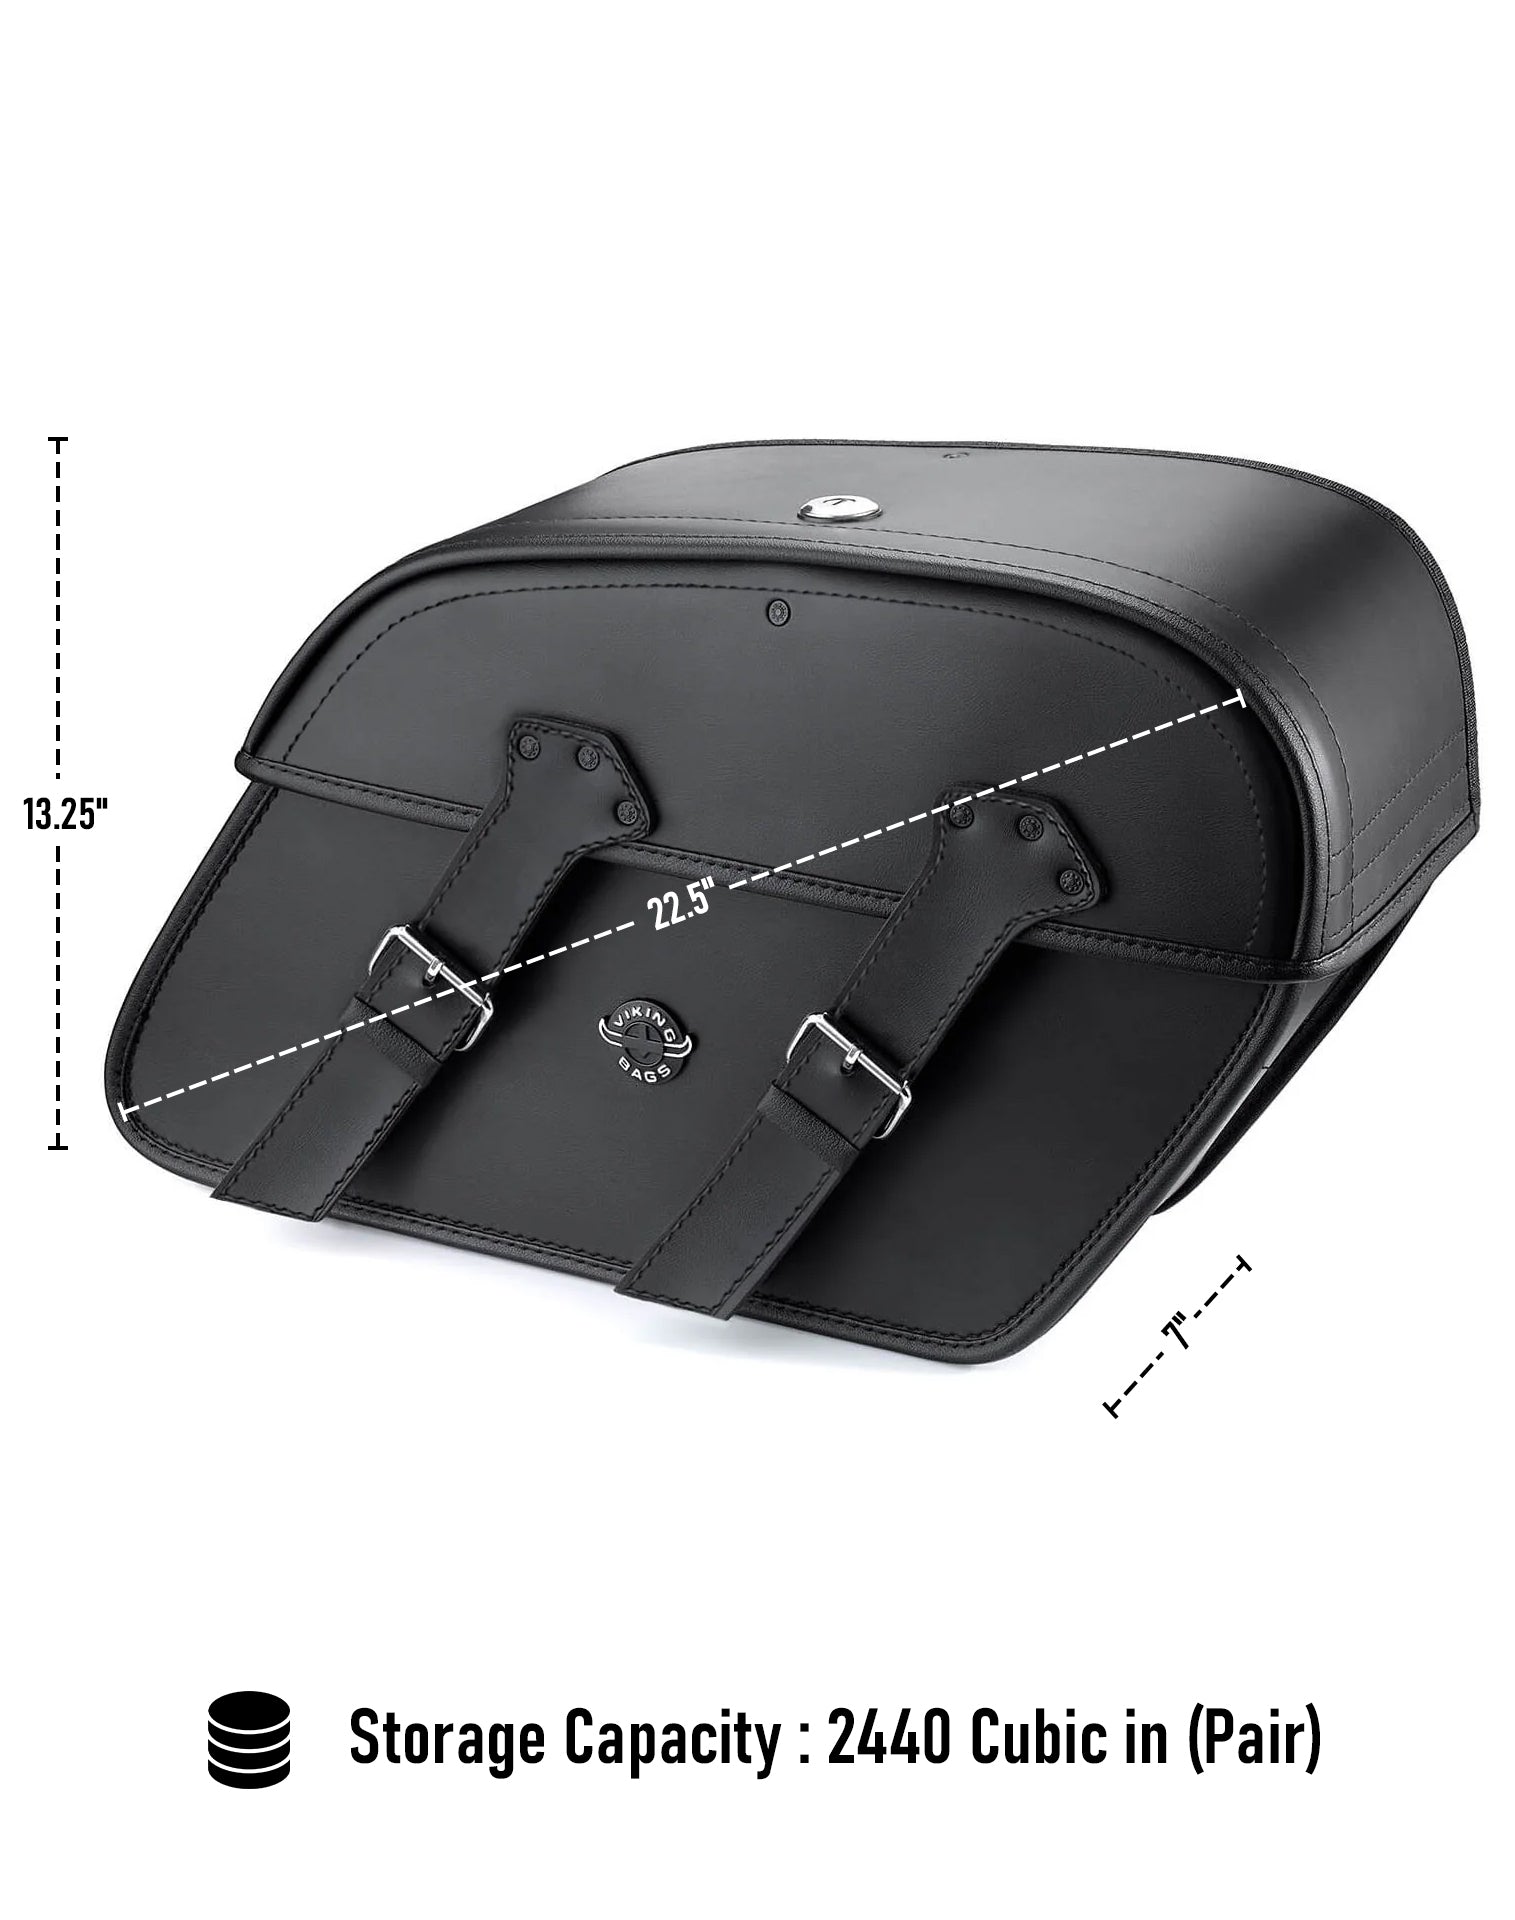 Viking Raven Extra Large Yamaha Raider Leather Motorcycle Saddlebags Can Store Your Ridings Gears